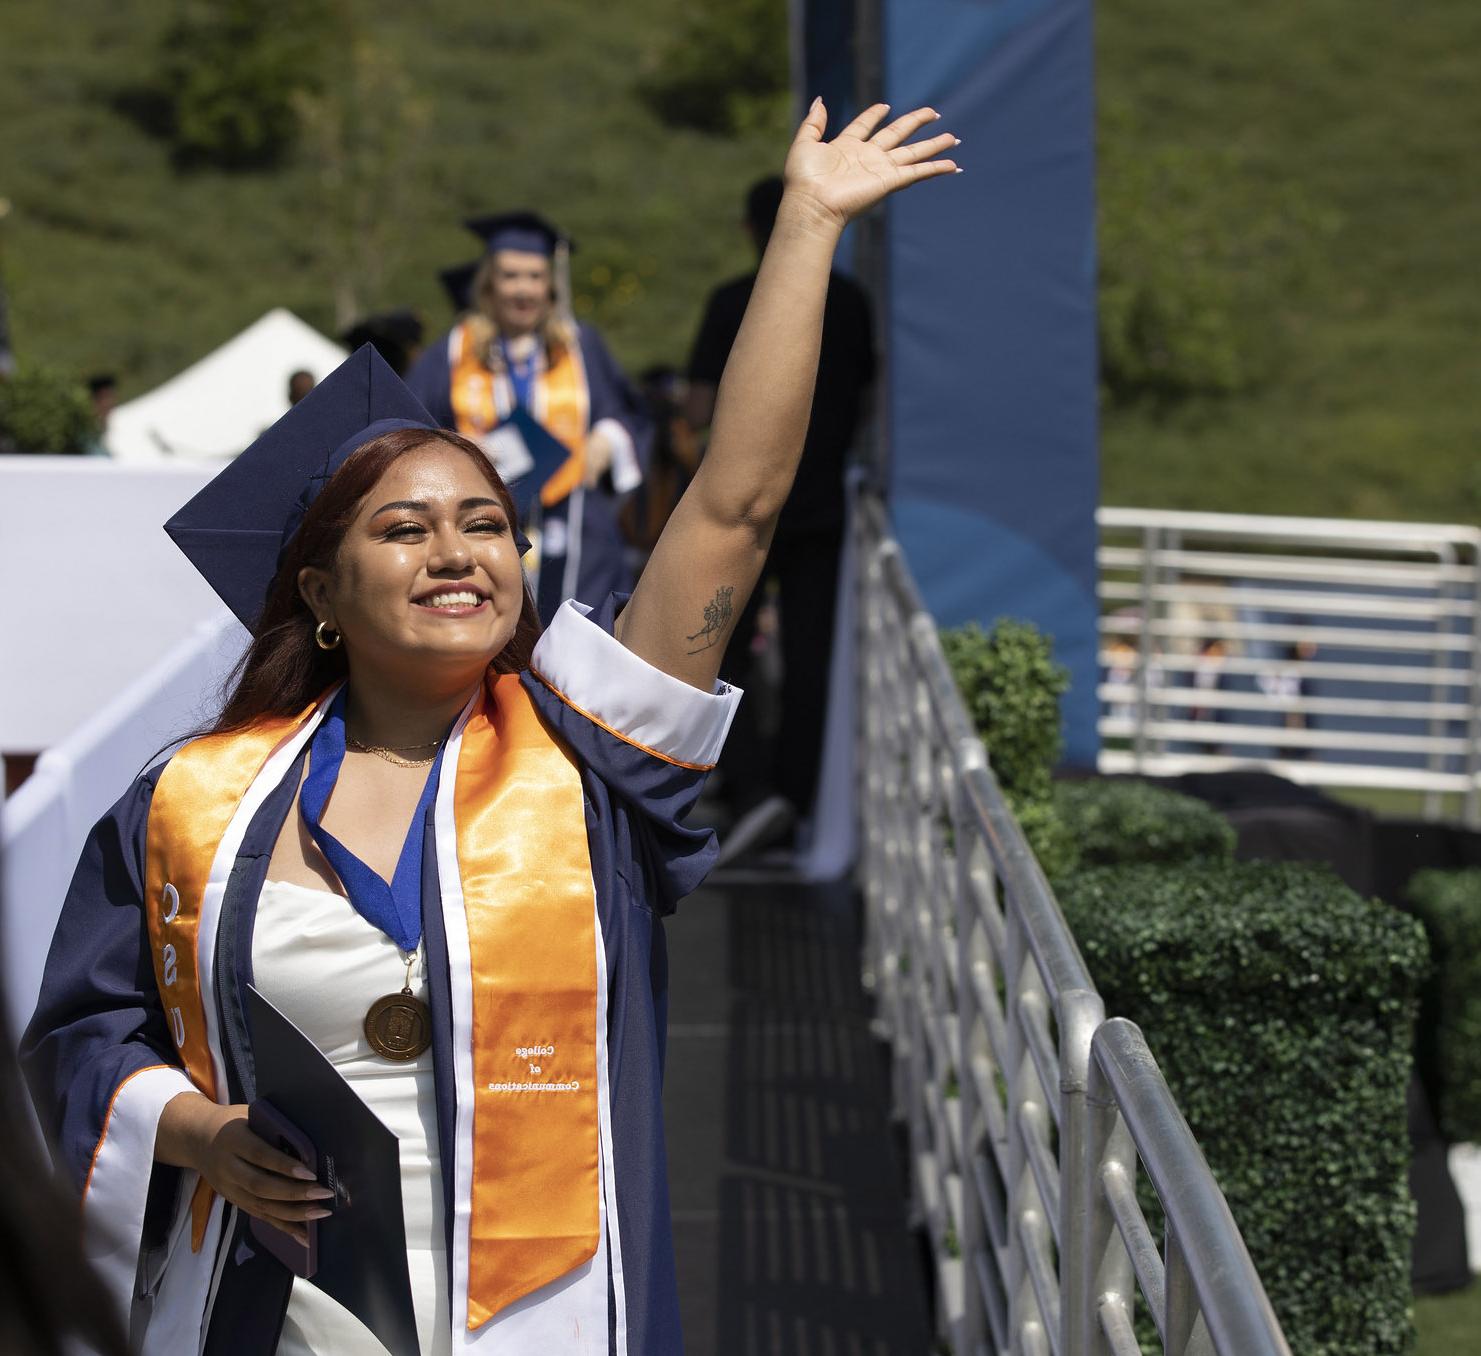 Latina student waves at crowd as she walks offstage after receiving her diploma during commencement.